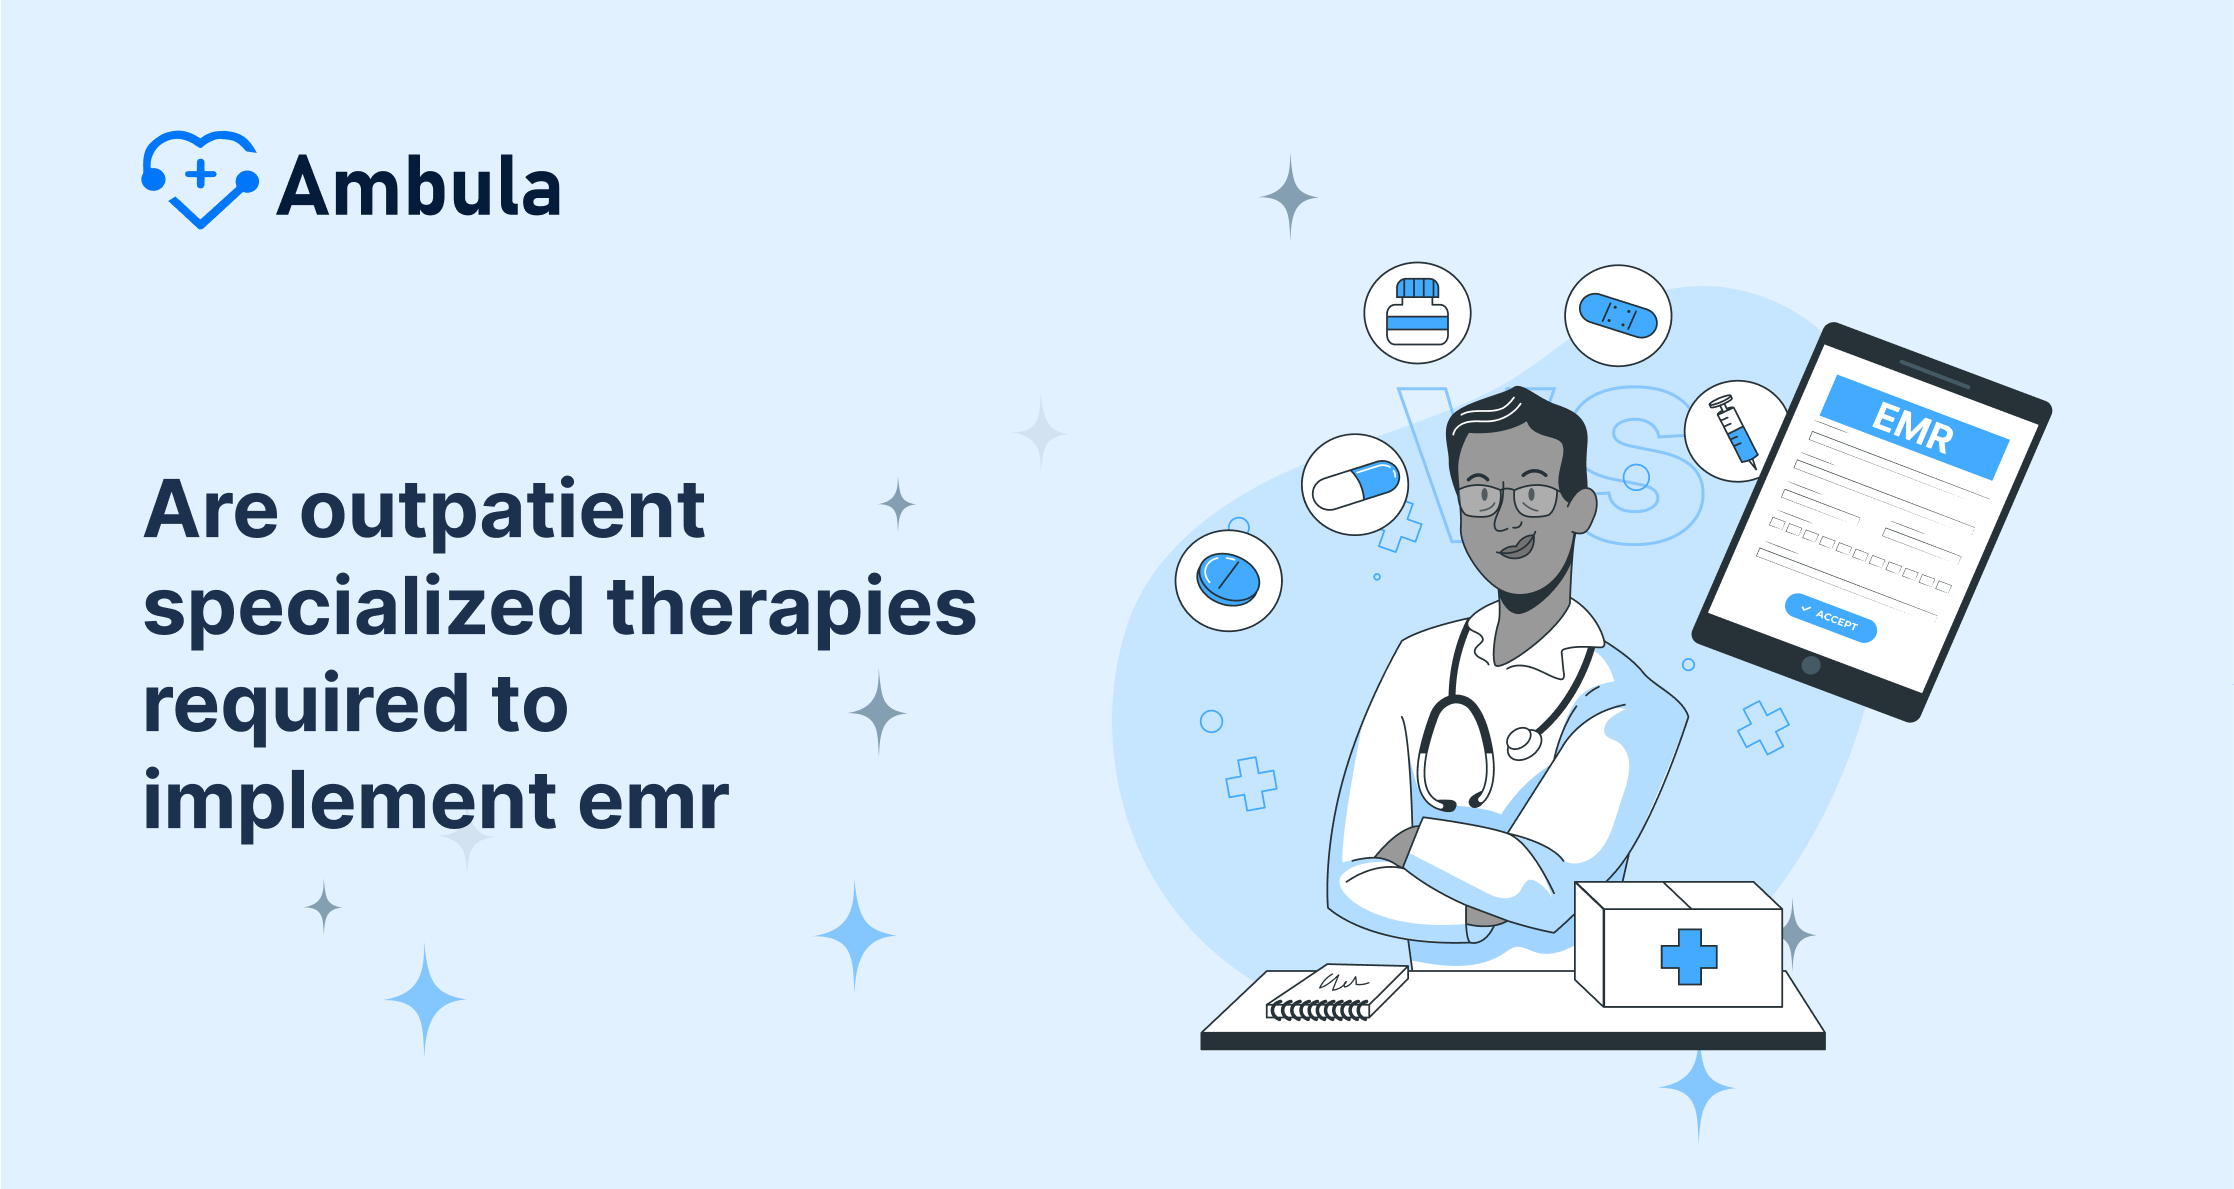 Are outpatient specialized therapies required to implement emr